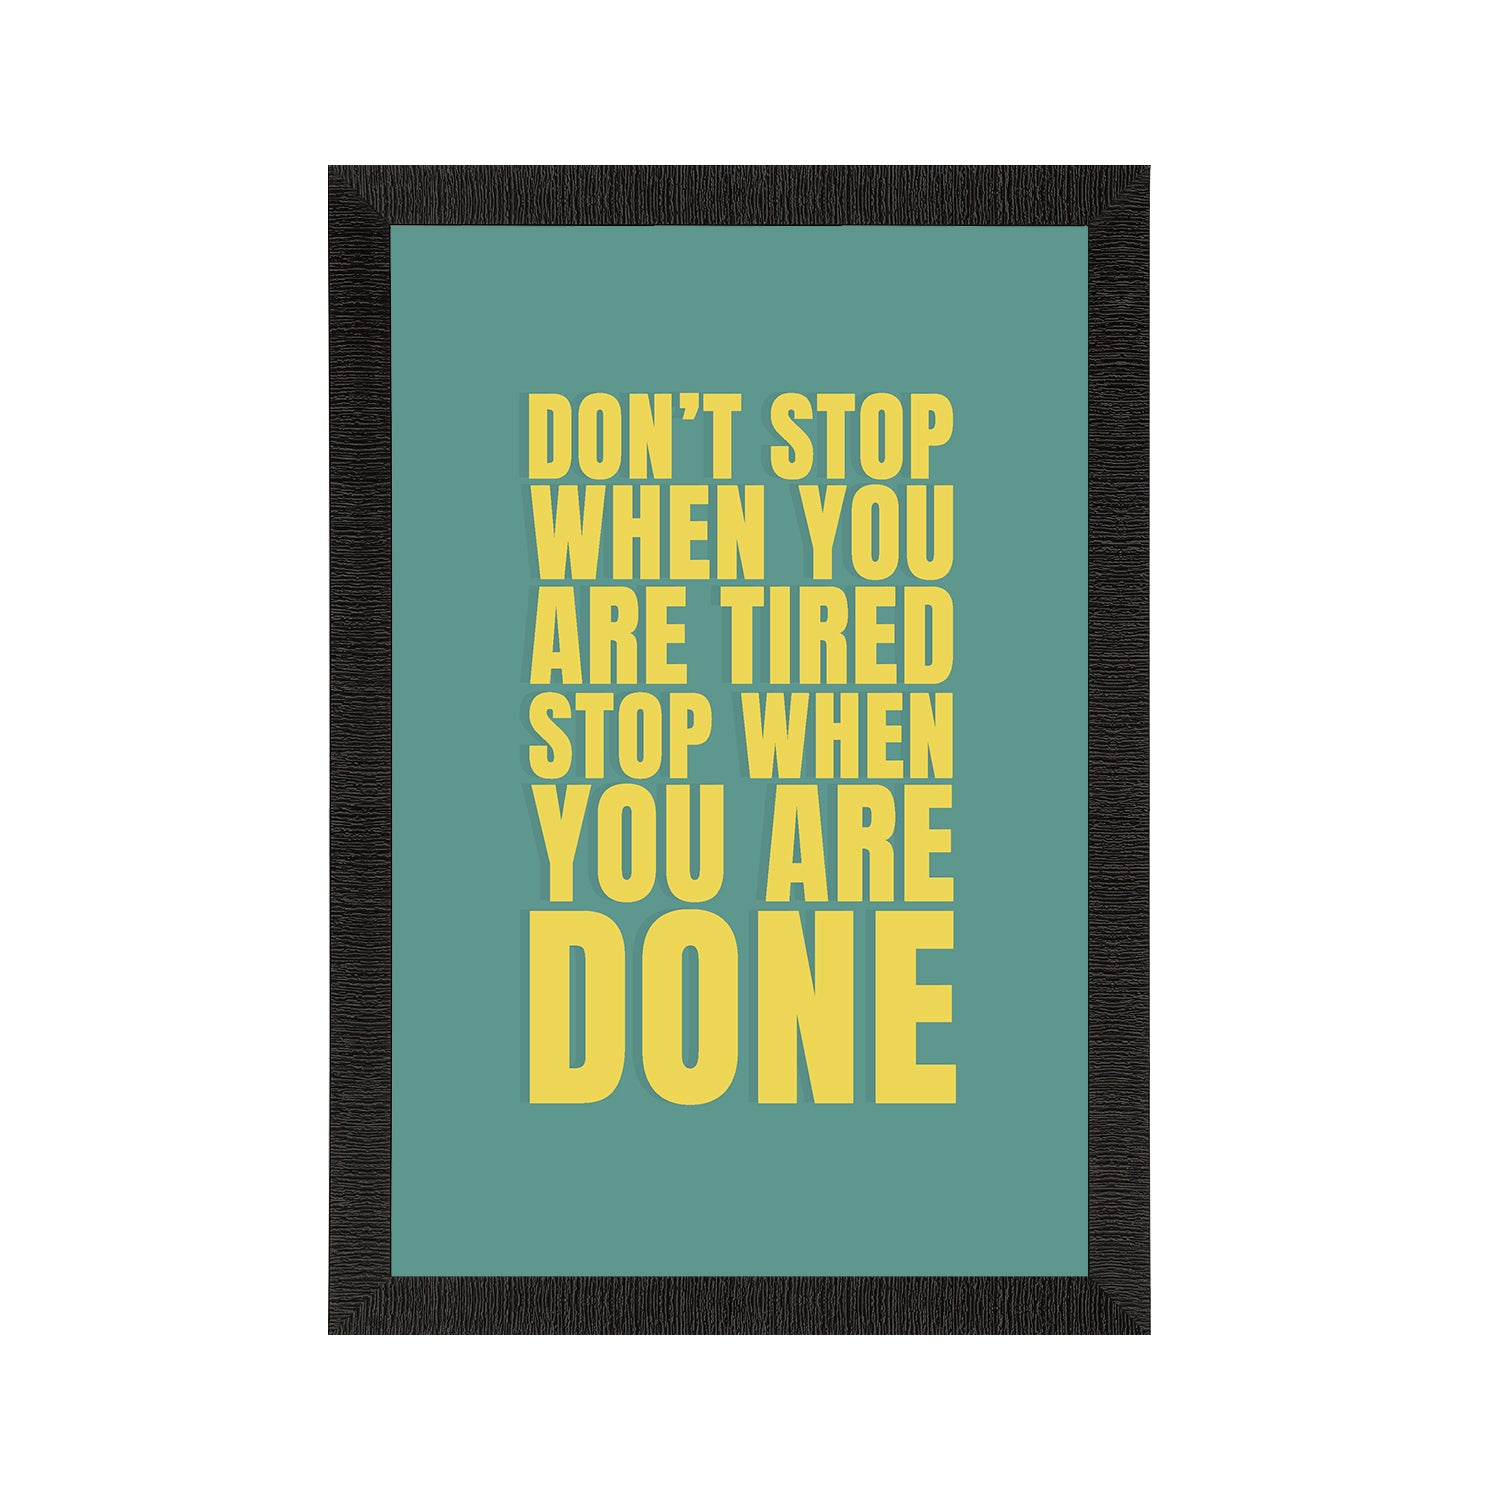 "Don't stop when you are tired" Motivational Quote Satin Matt Texture UV Art Painting